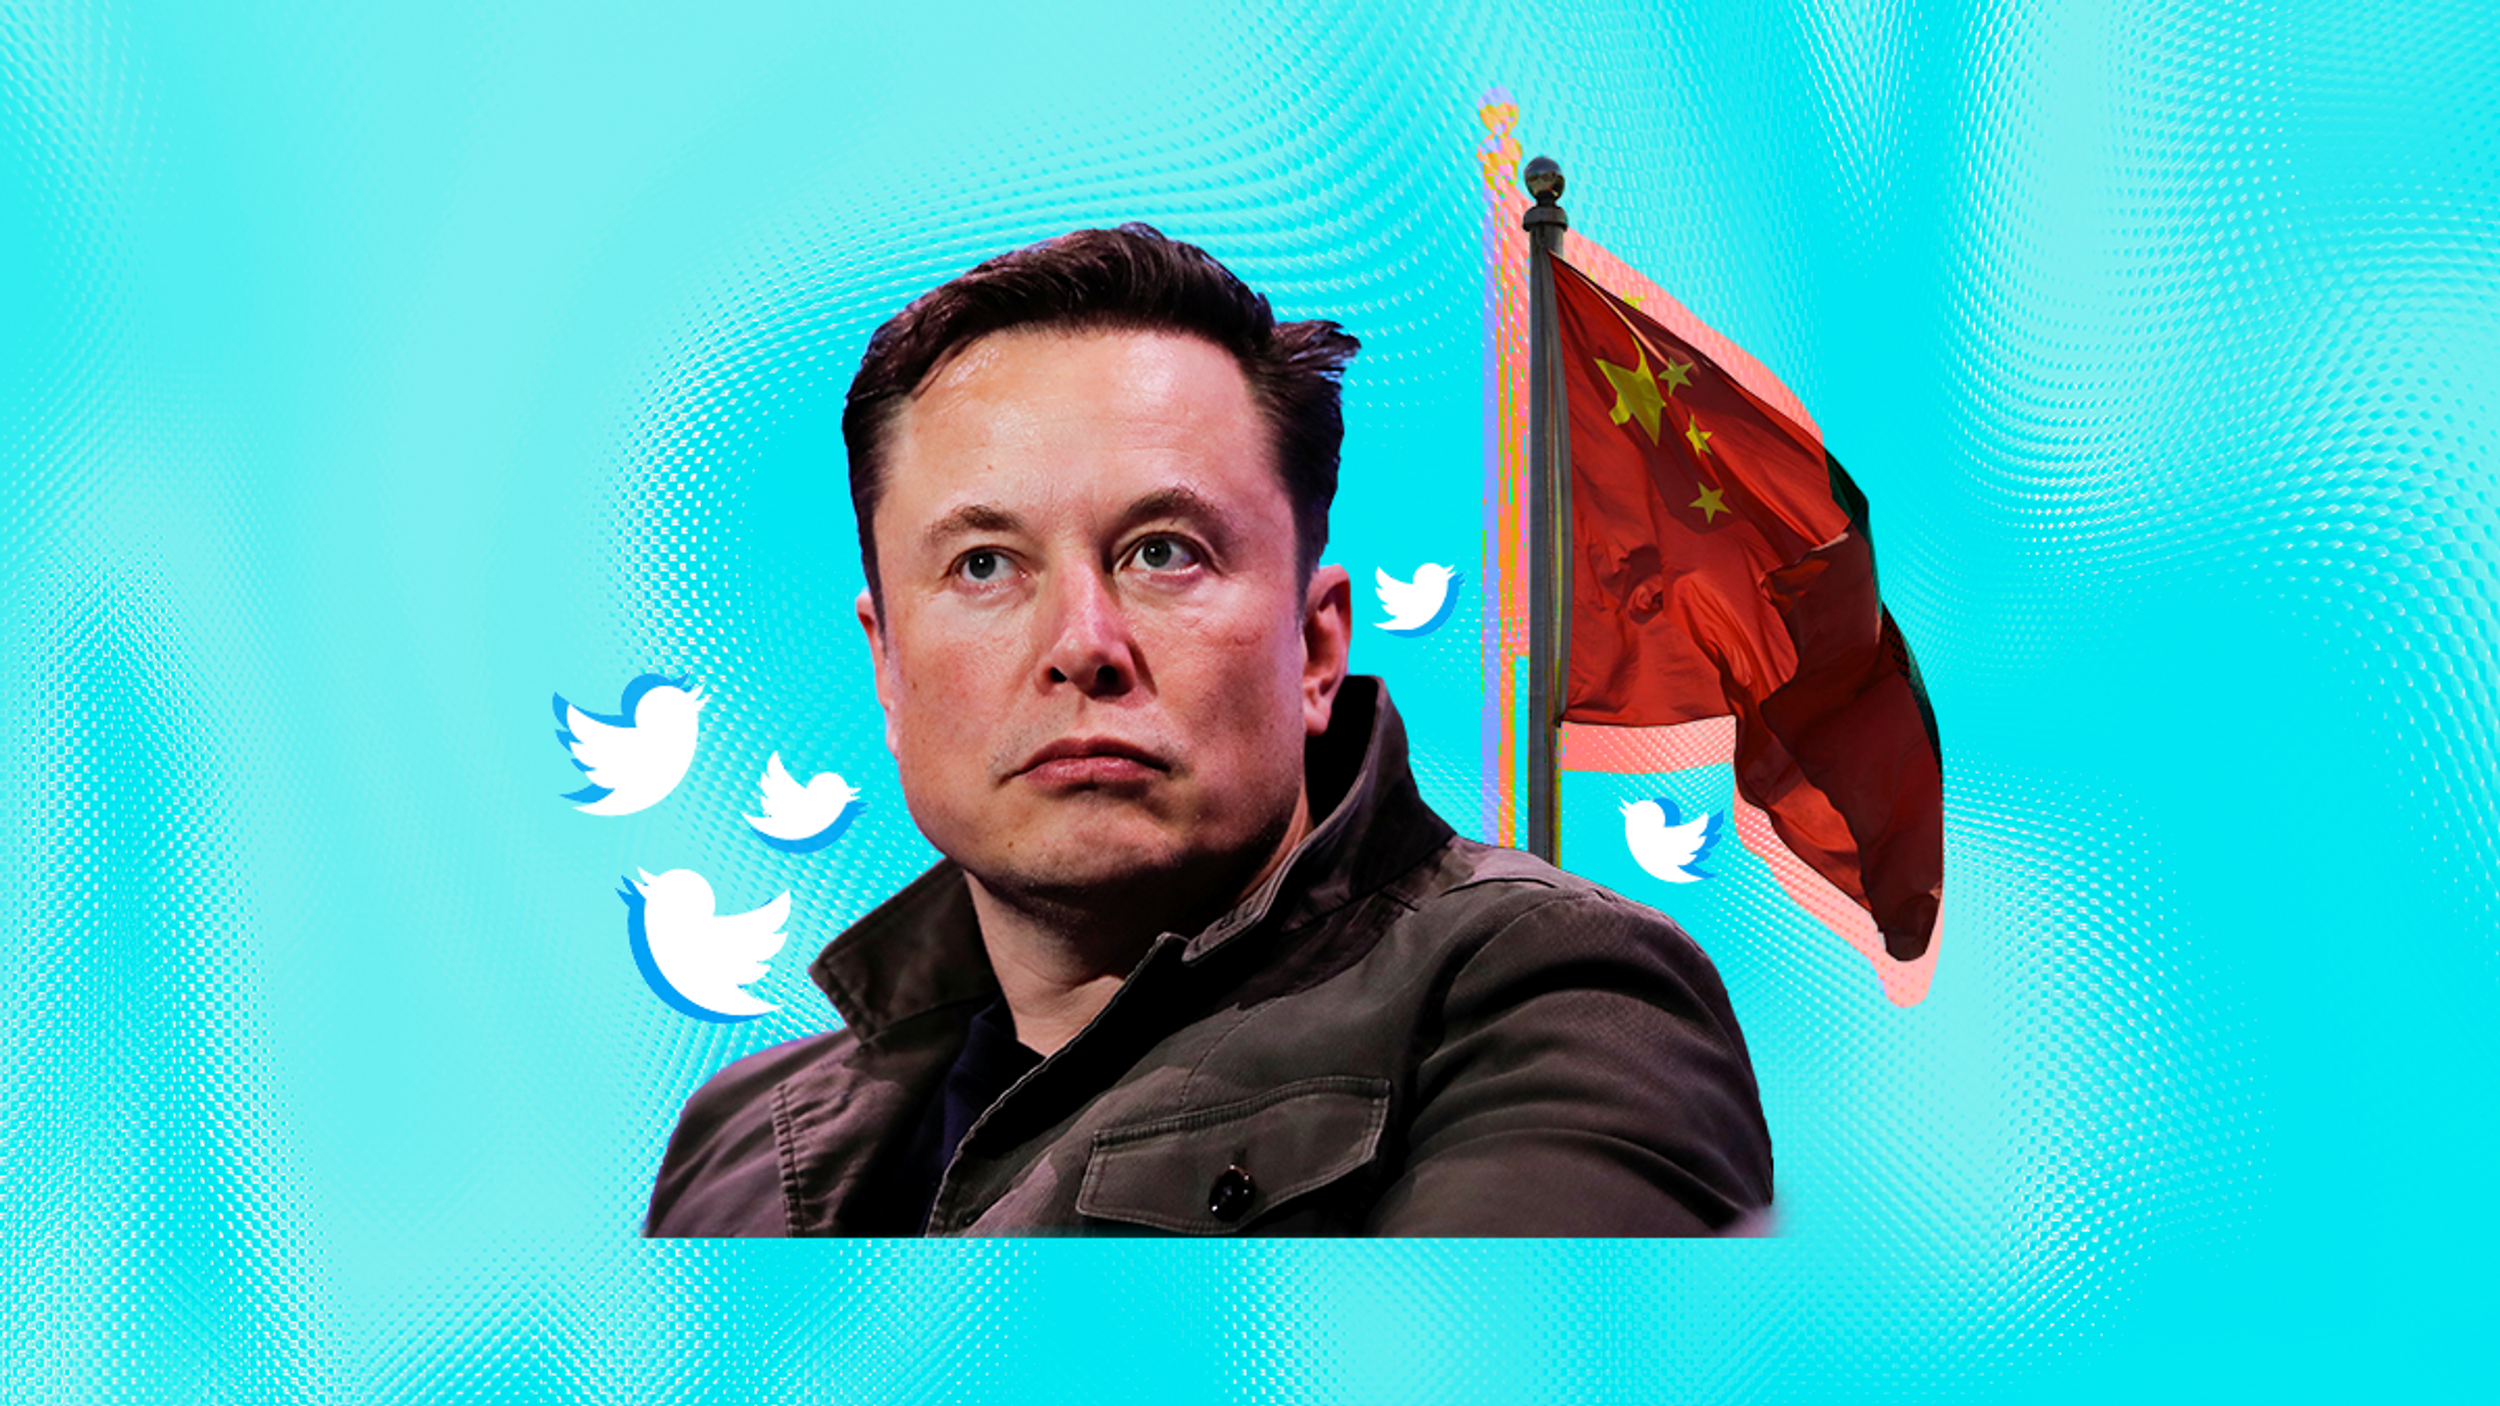 Will Elon Musk have a China problem with Twitter?